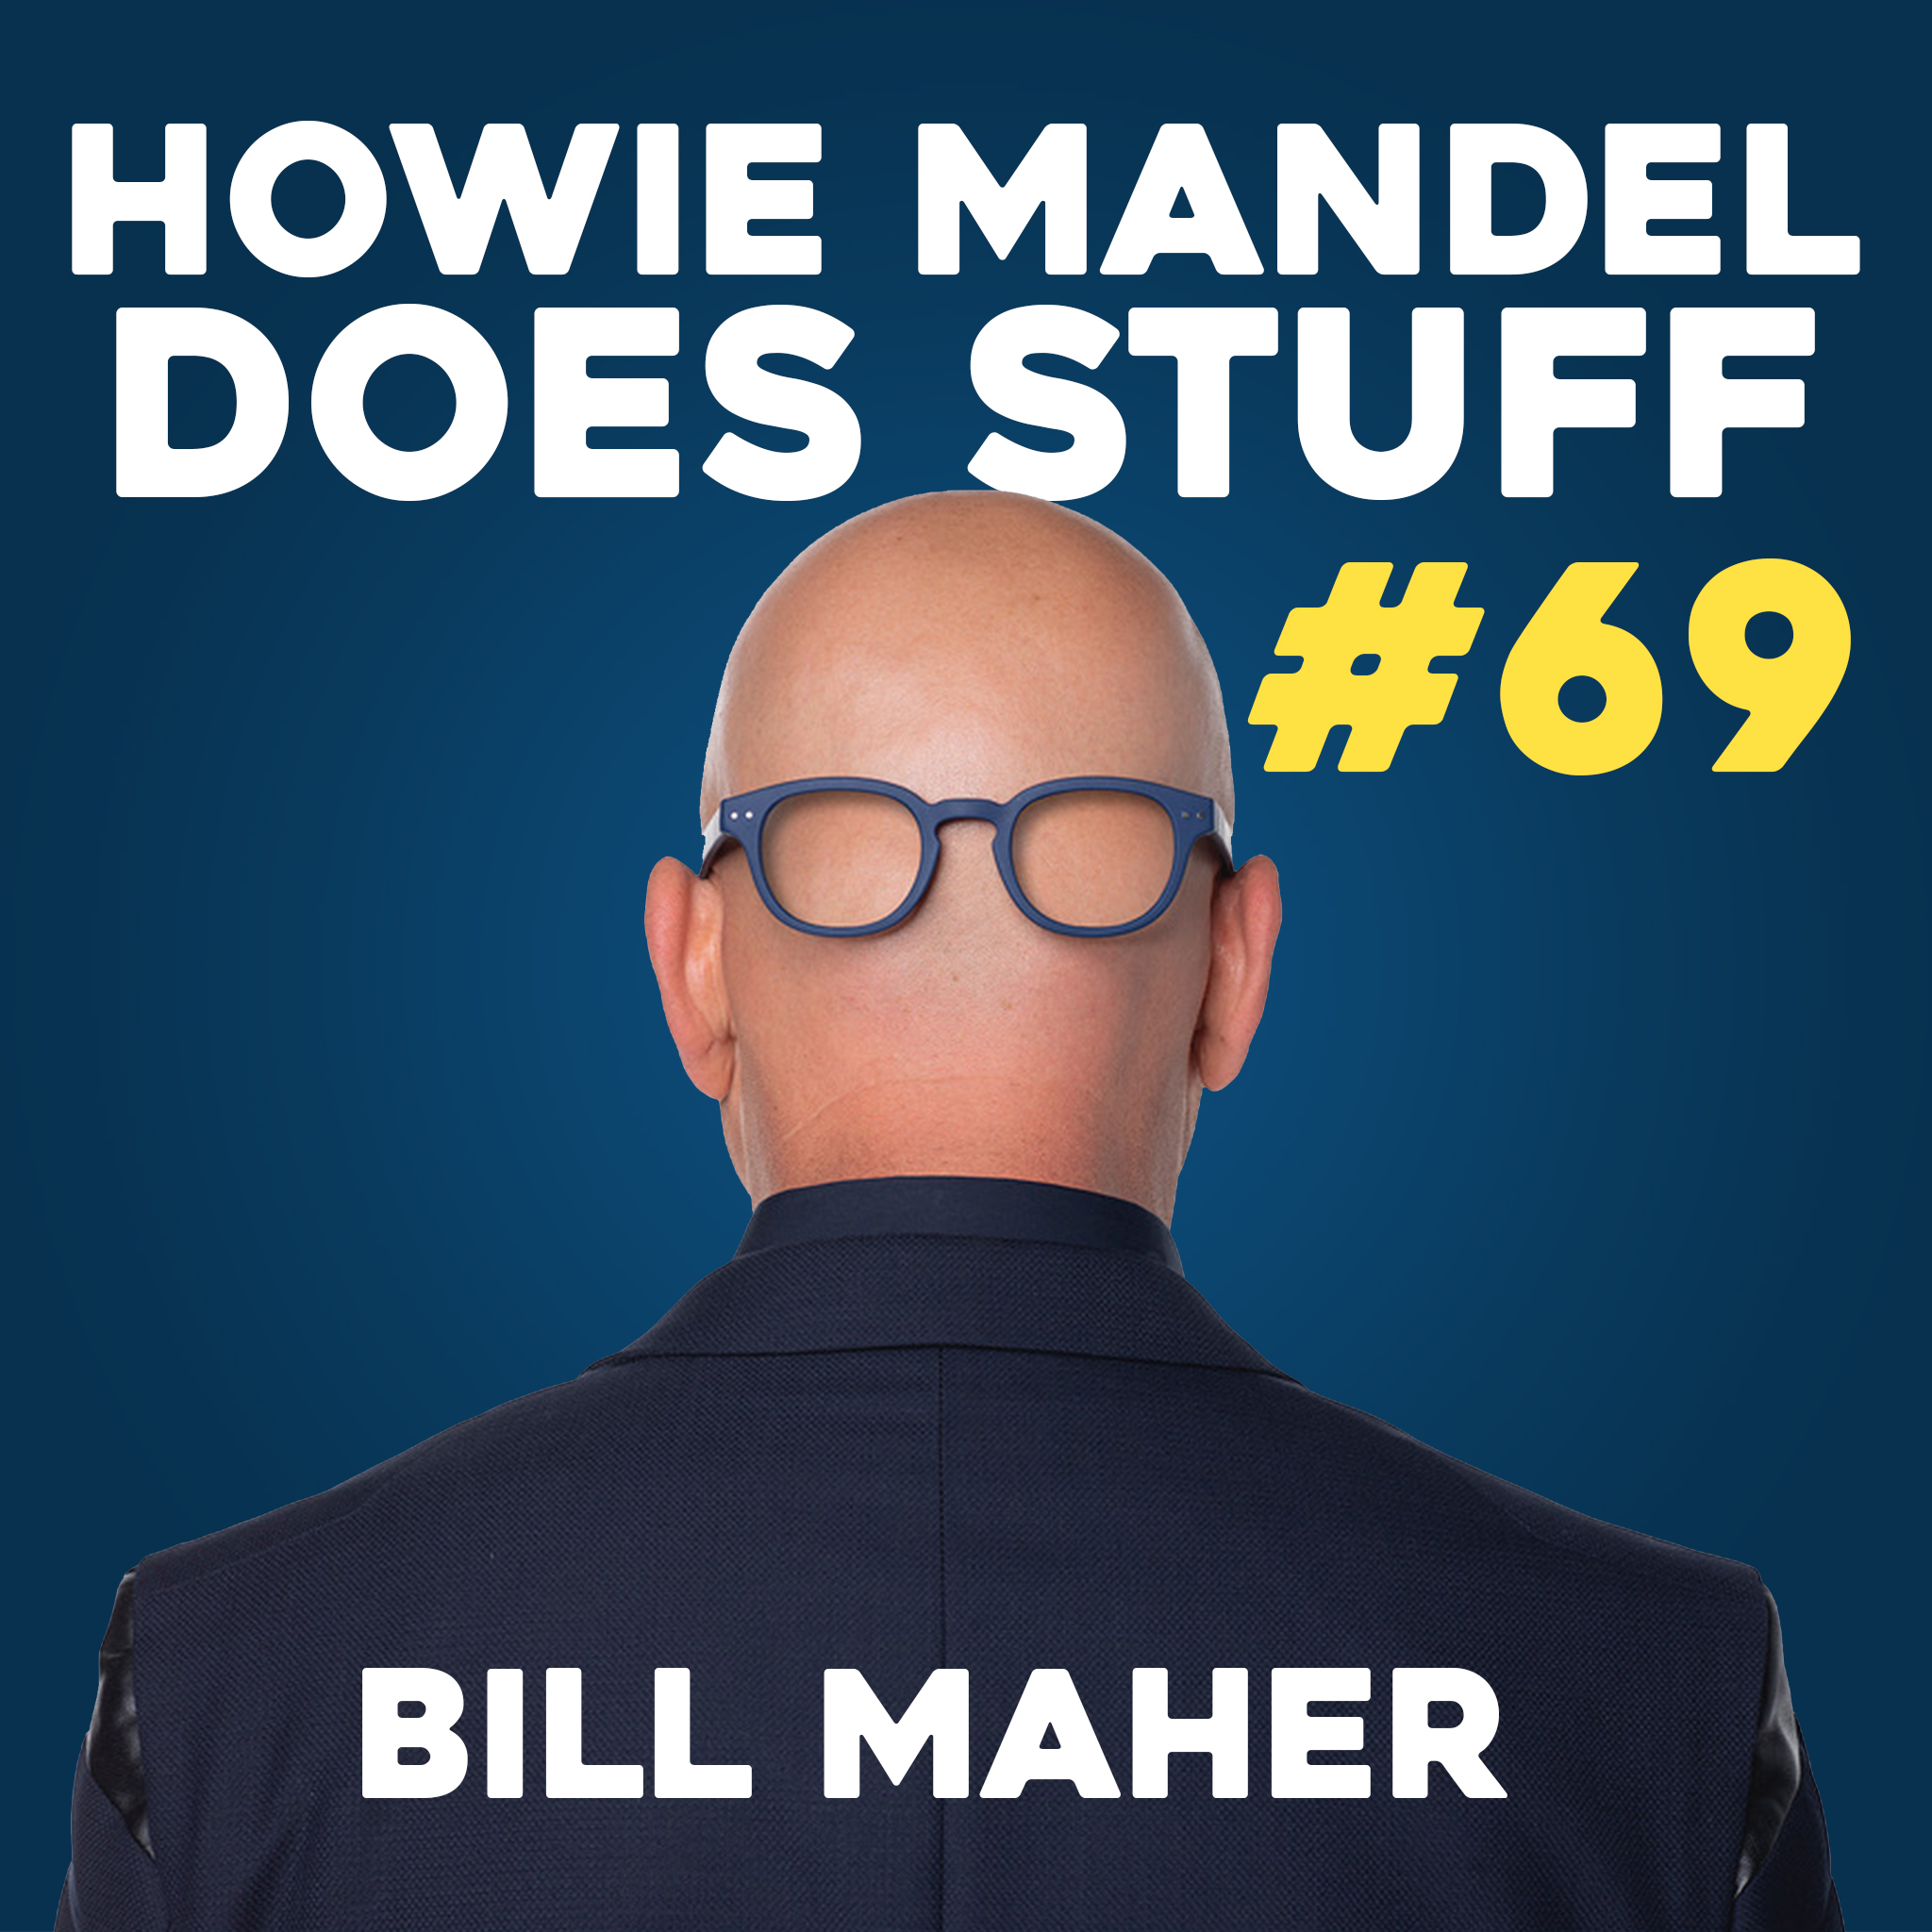 Bill Maher Has a Different Take on White Privilege | Howie Mandel Does Stuff #69